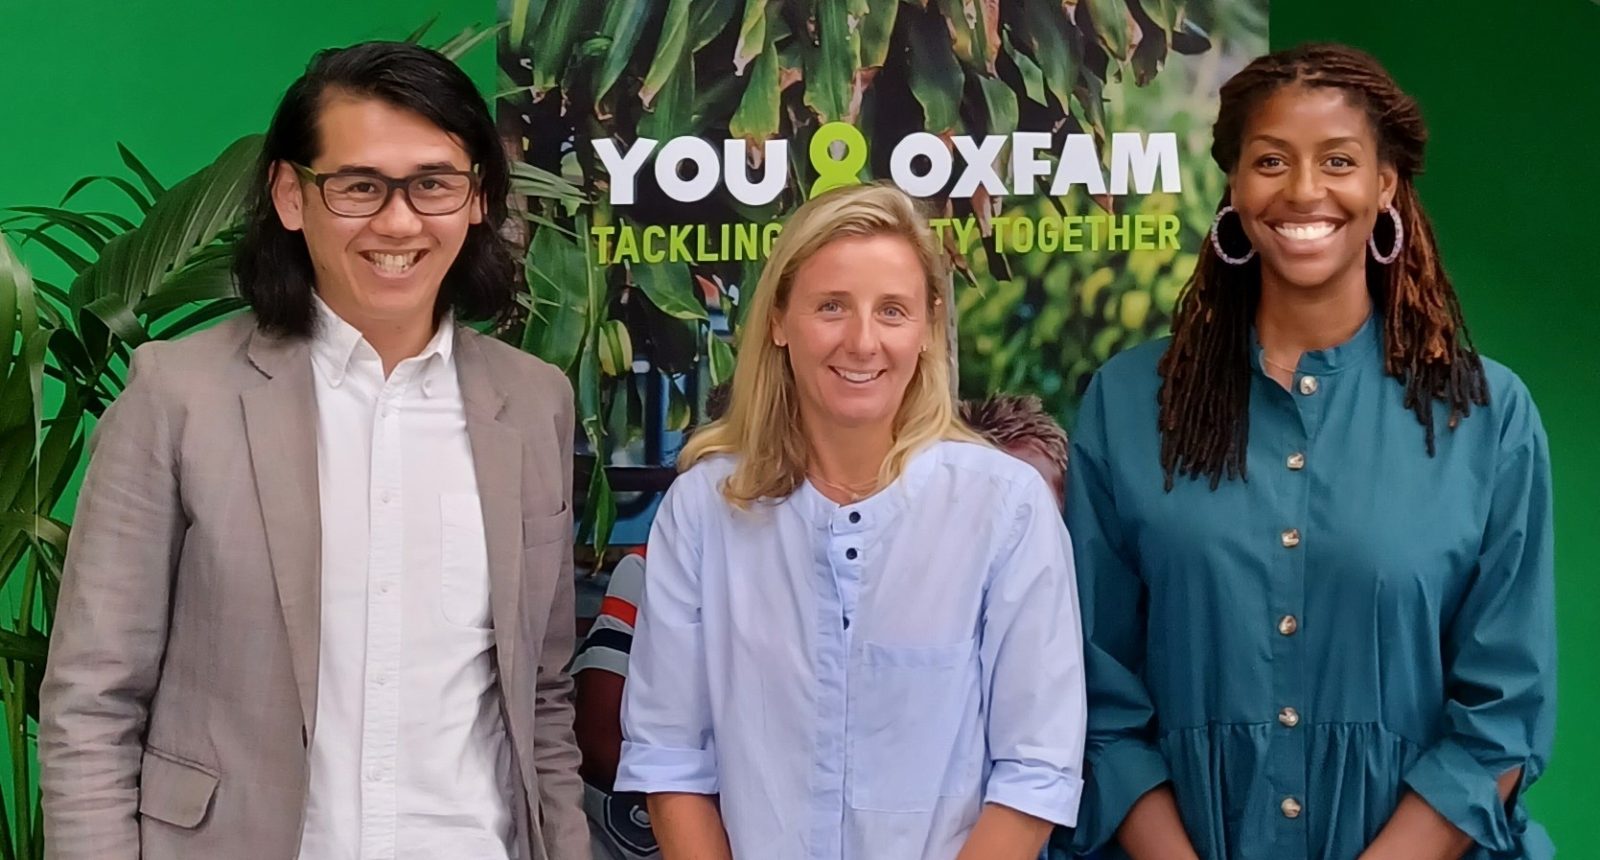 A man and two women all smiling in front of an Oxfam poster